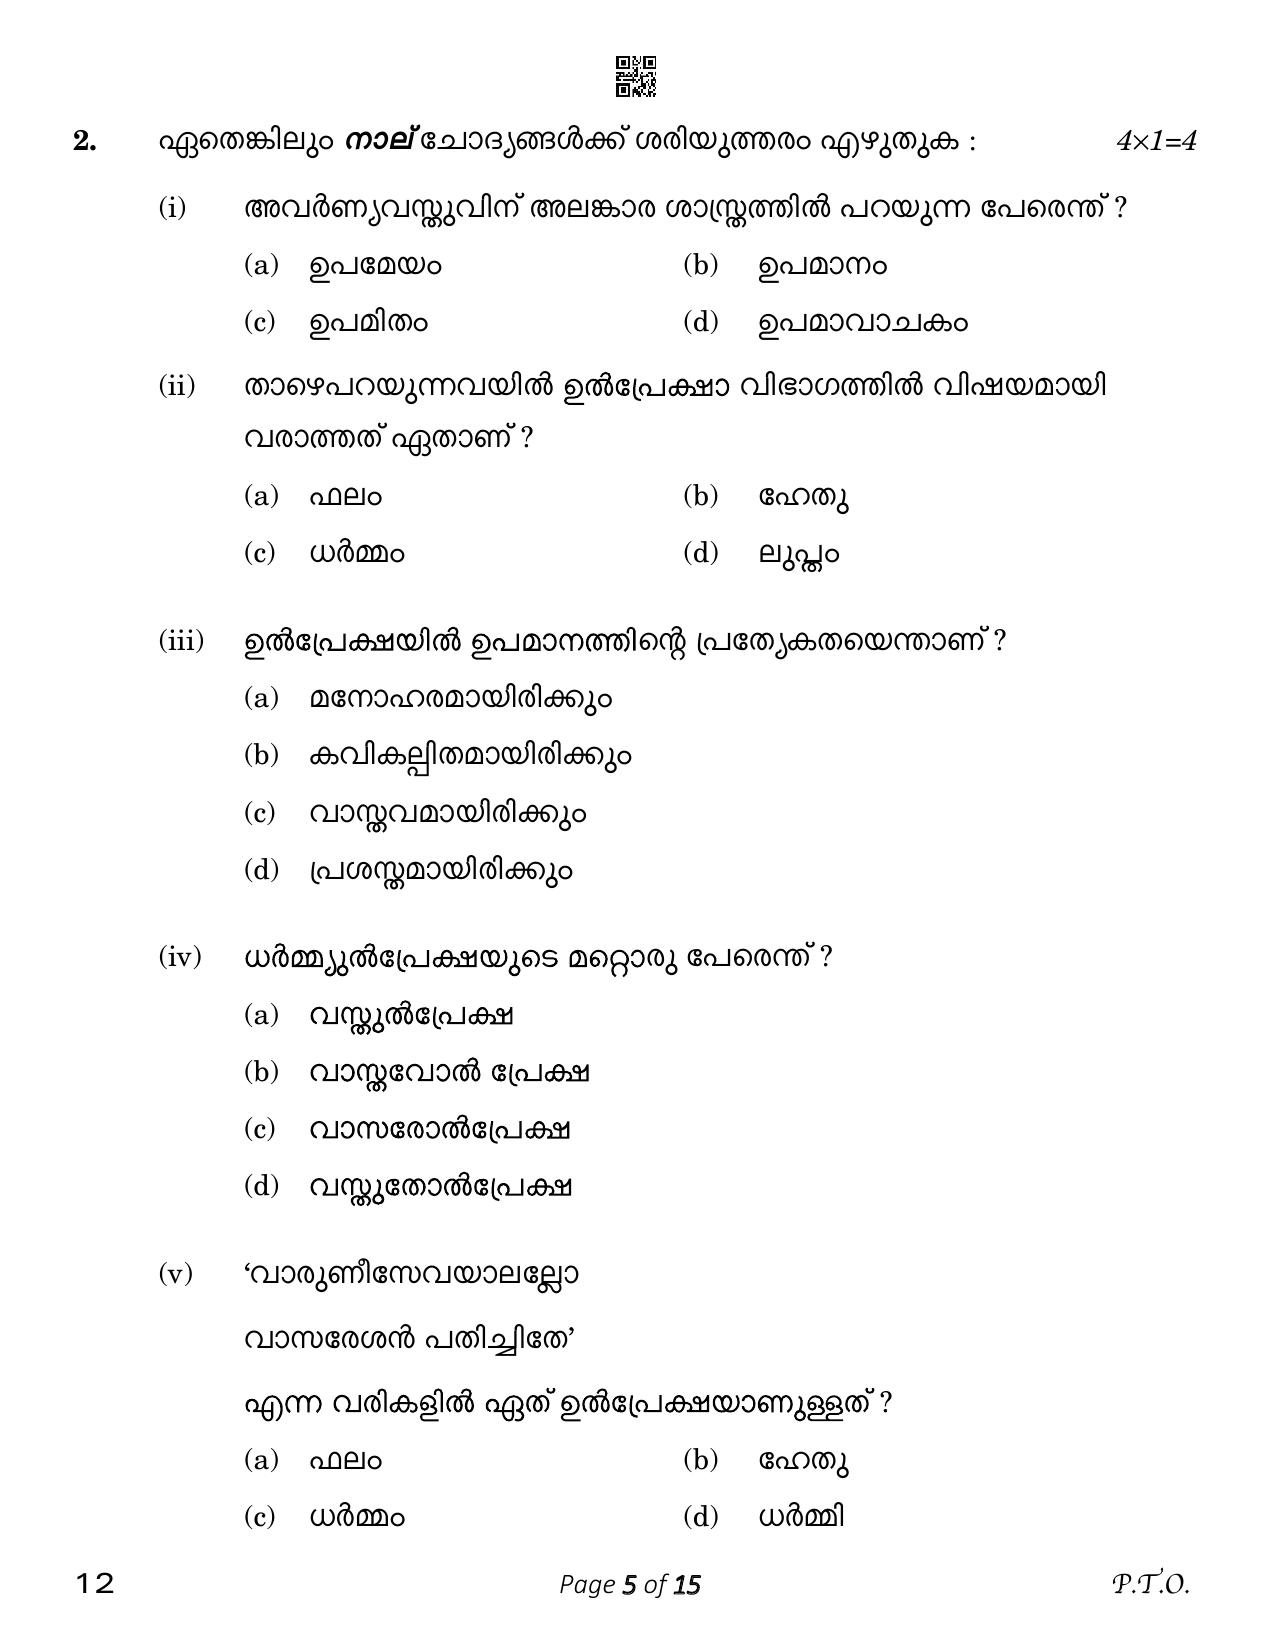 CBSE Class 12 Malayalam (Compartment) 2023 Question Paper - Page 5